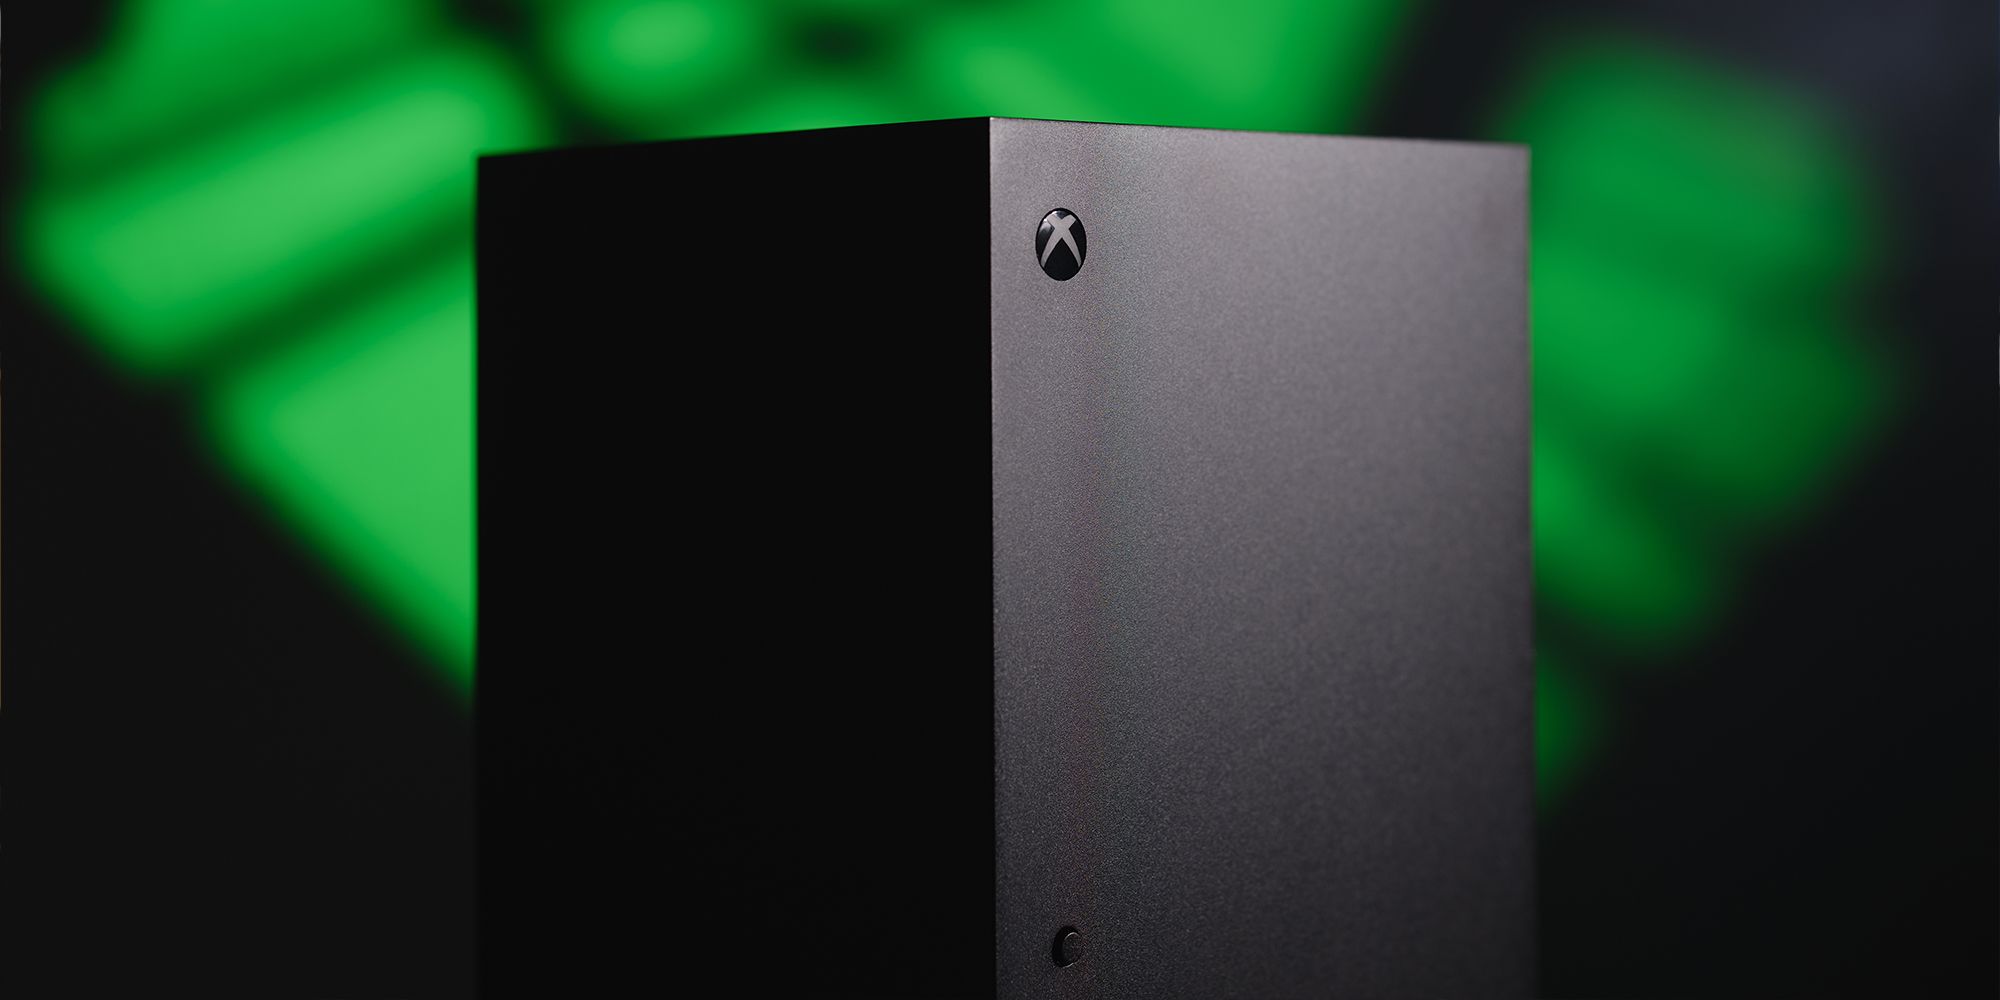 Xbox Series X over a blurred green and black background